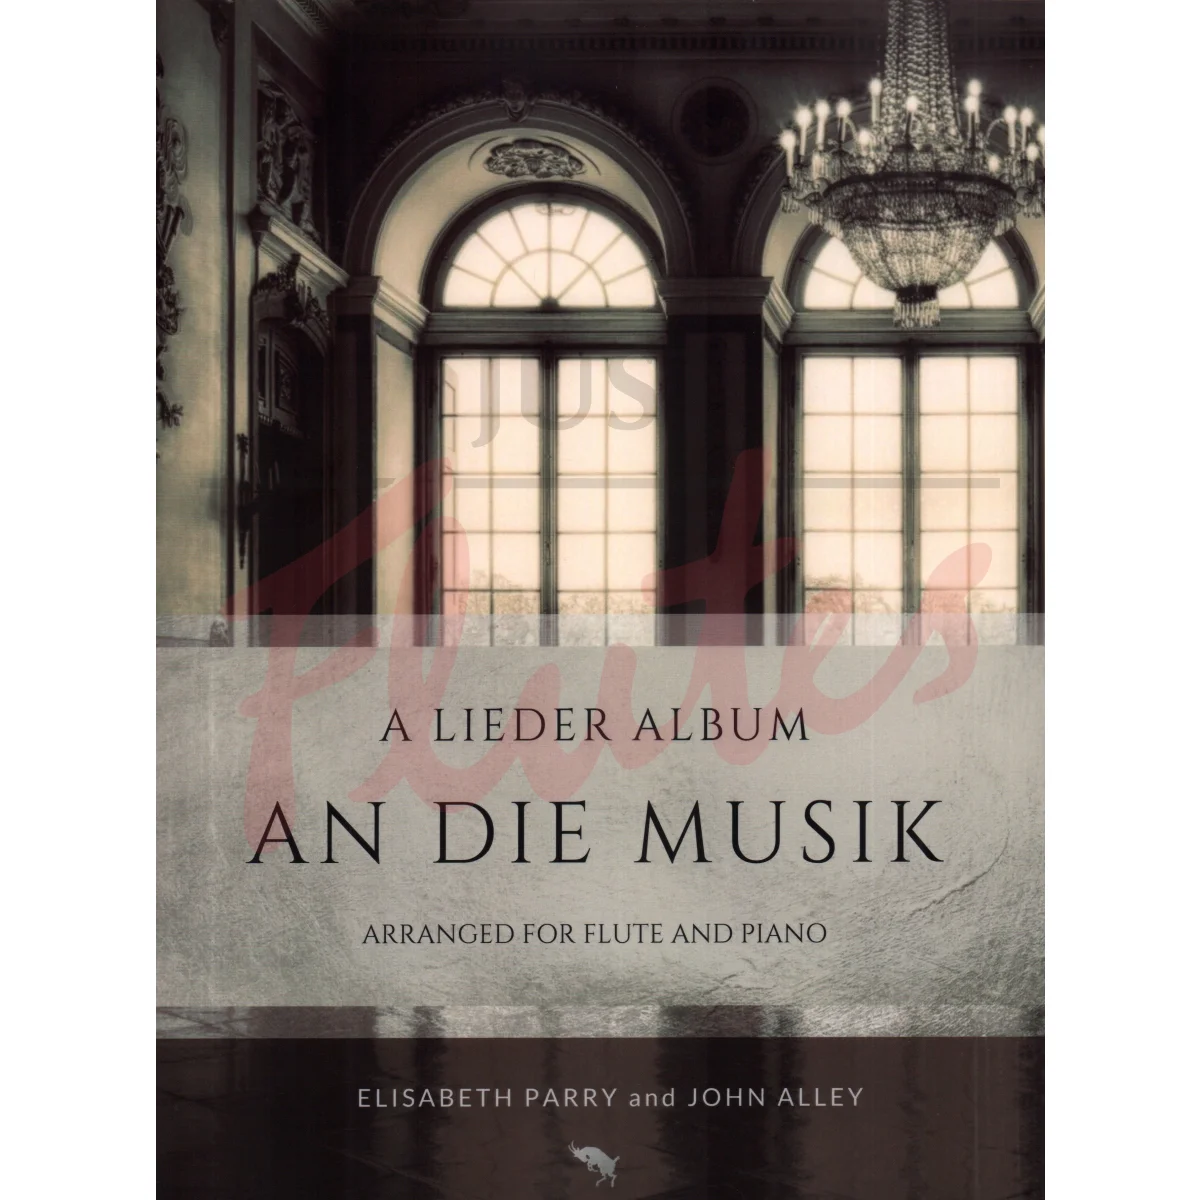 An Die Musik for Flute and Piano